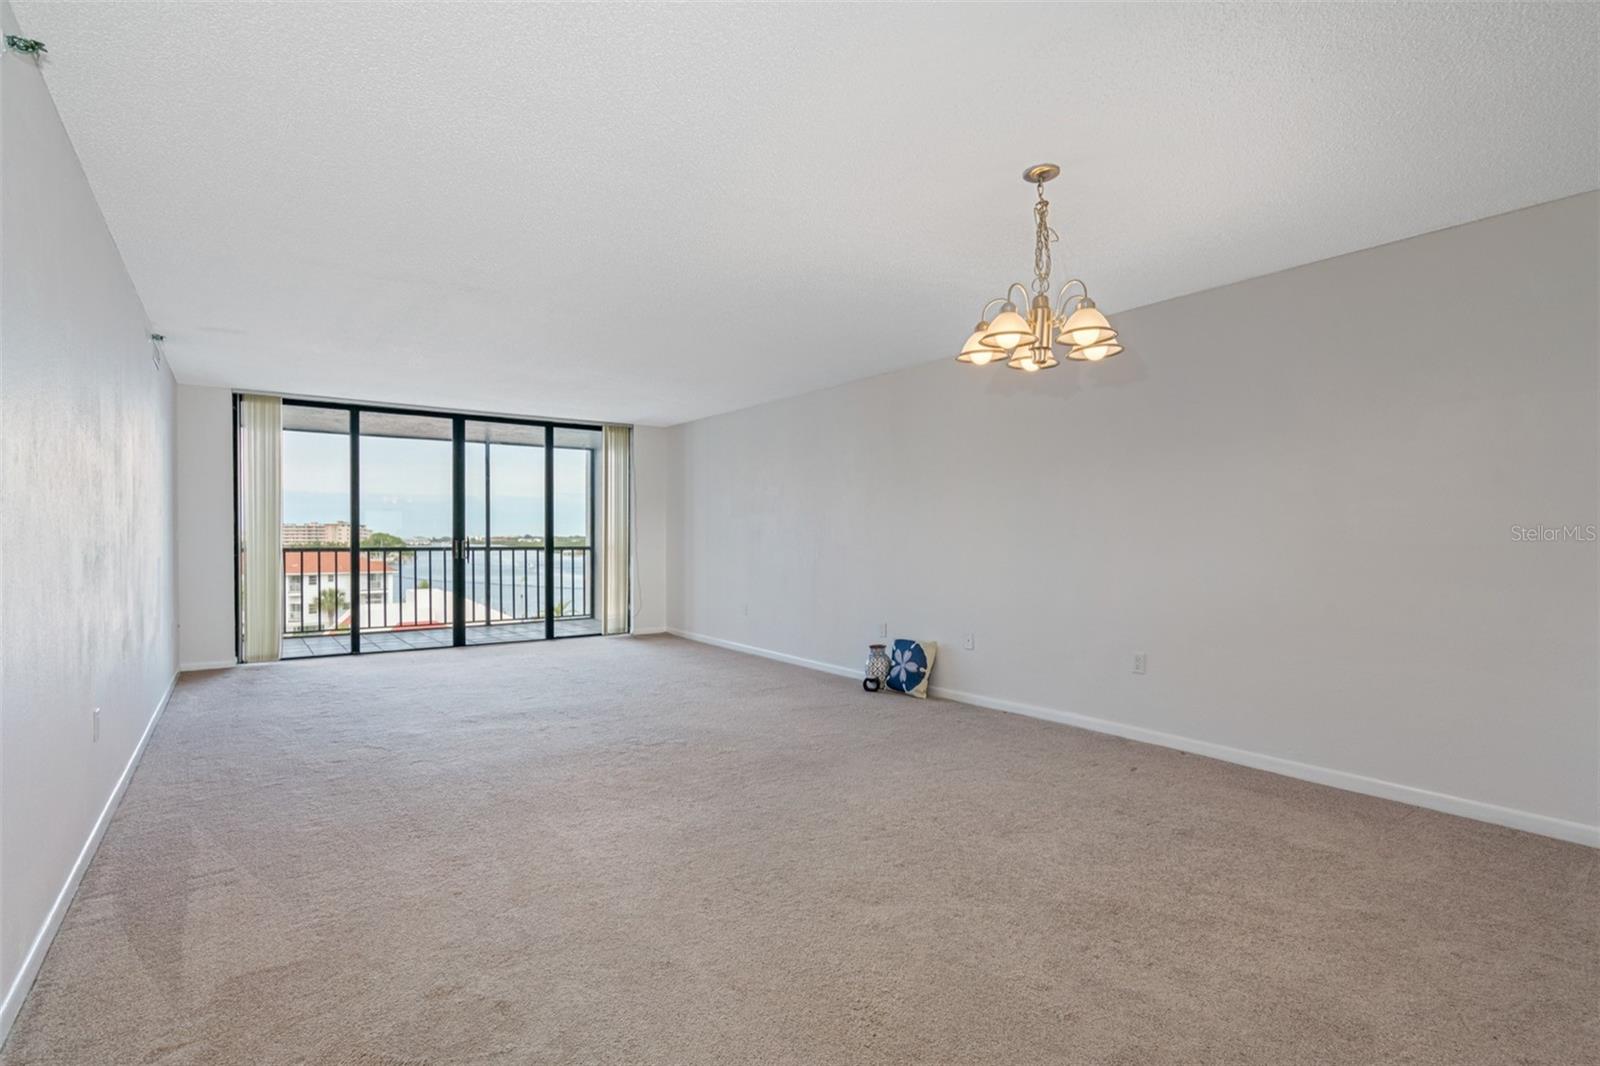 .. Large Great room Looking Towards Balcony,,. Large Great room Looking Toward Water Front Balcony.